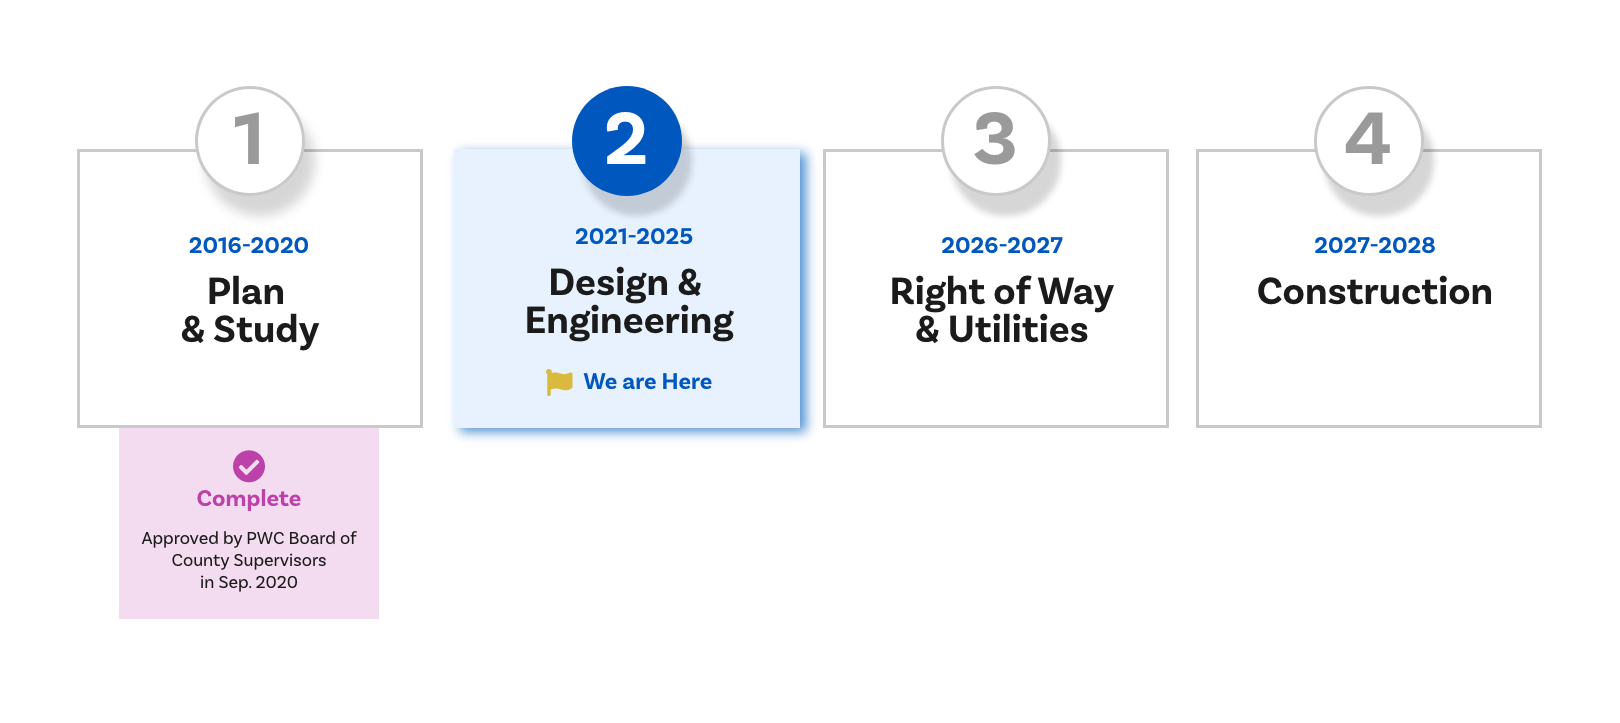 four major phases of the project